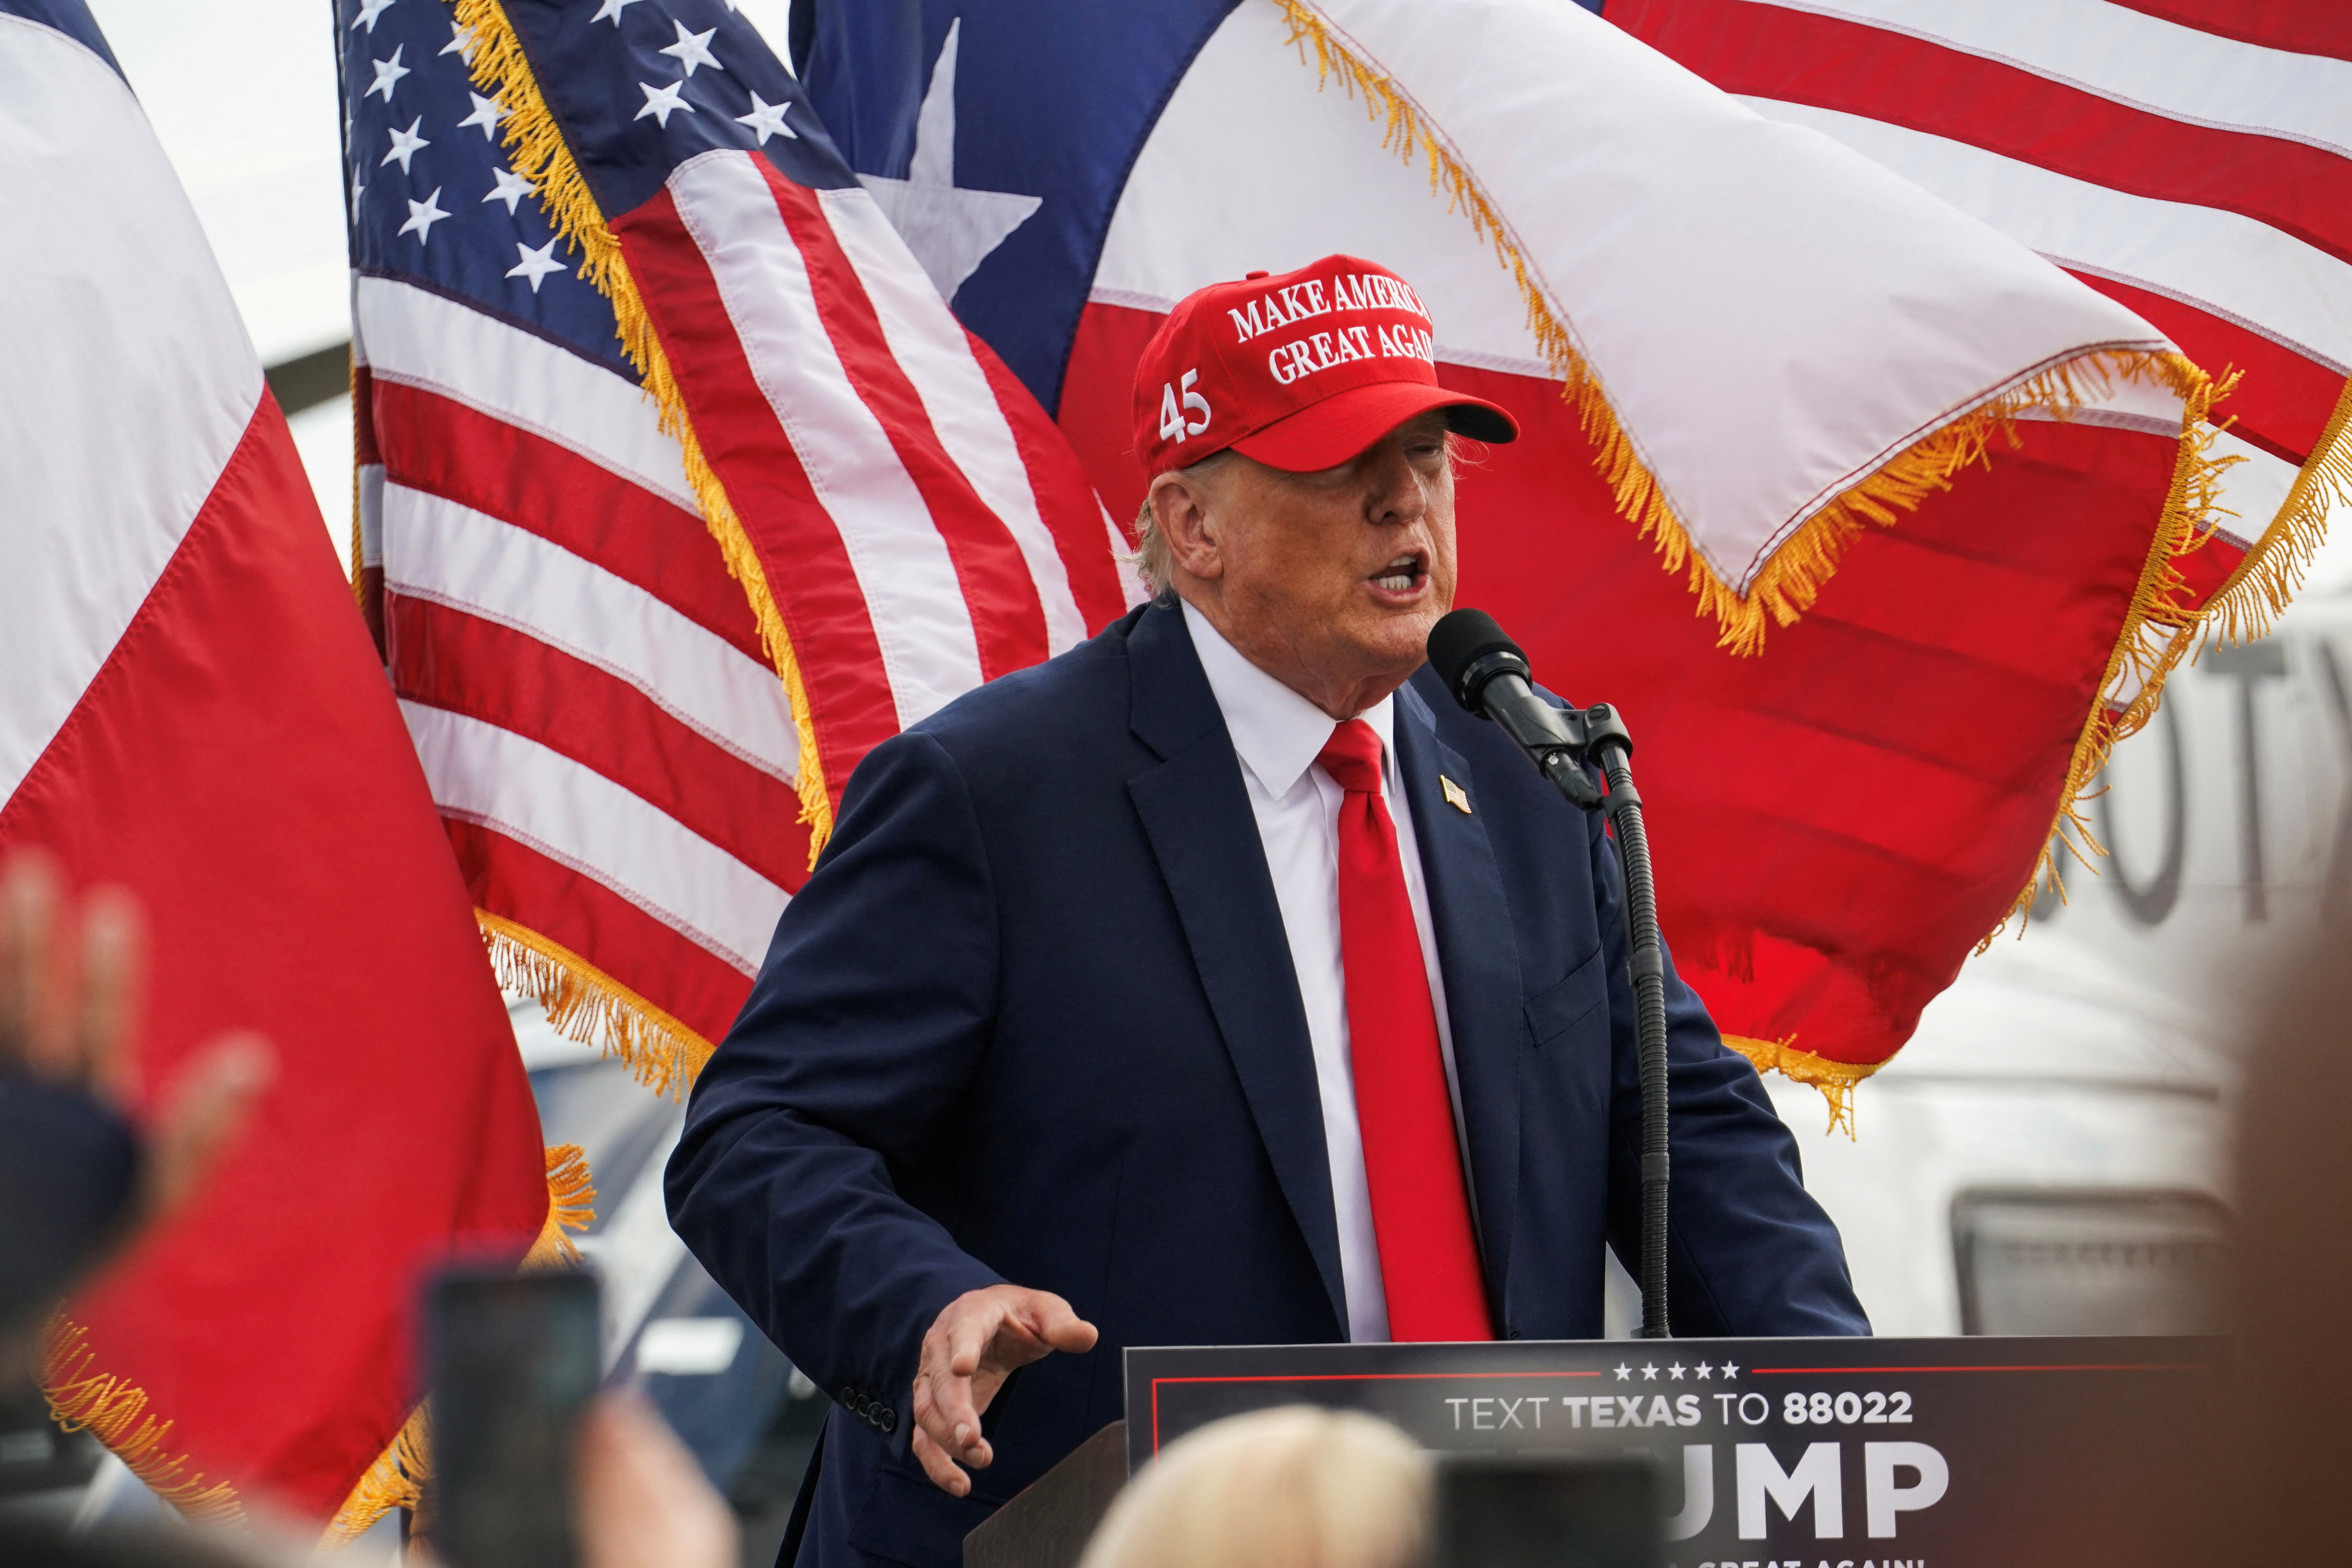 Trump visits the southern border with Texas Governor Abbott in Edinburg, TX